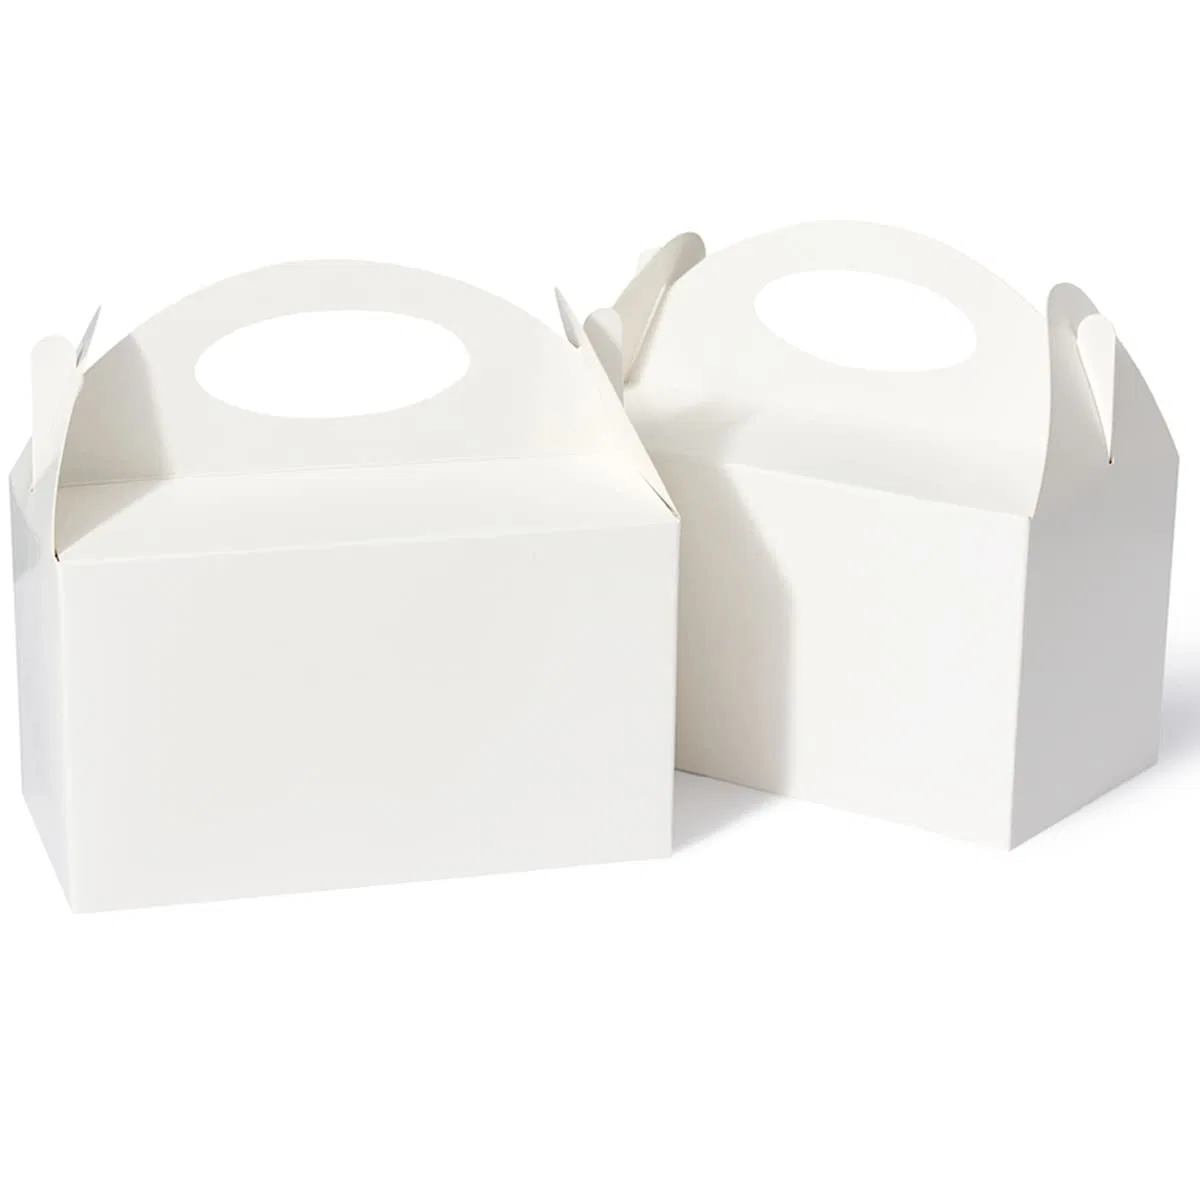 Party Treat Boxes White, 6 Inch Candy Boxes Party Favors with Handle Paper Cookie Gift Bags Gable Boxes Snack Goodie Bags for Kids Birthday Baby Shower Wedding